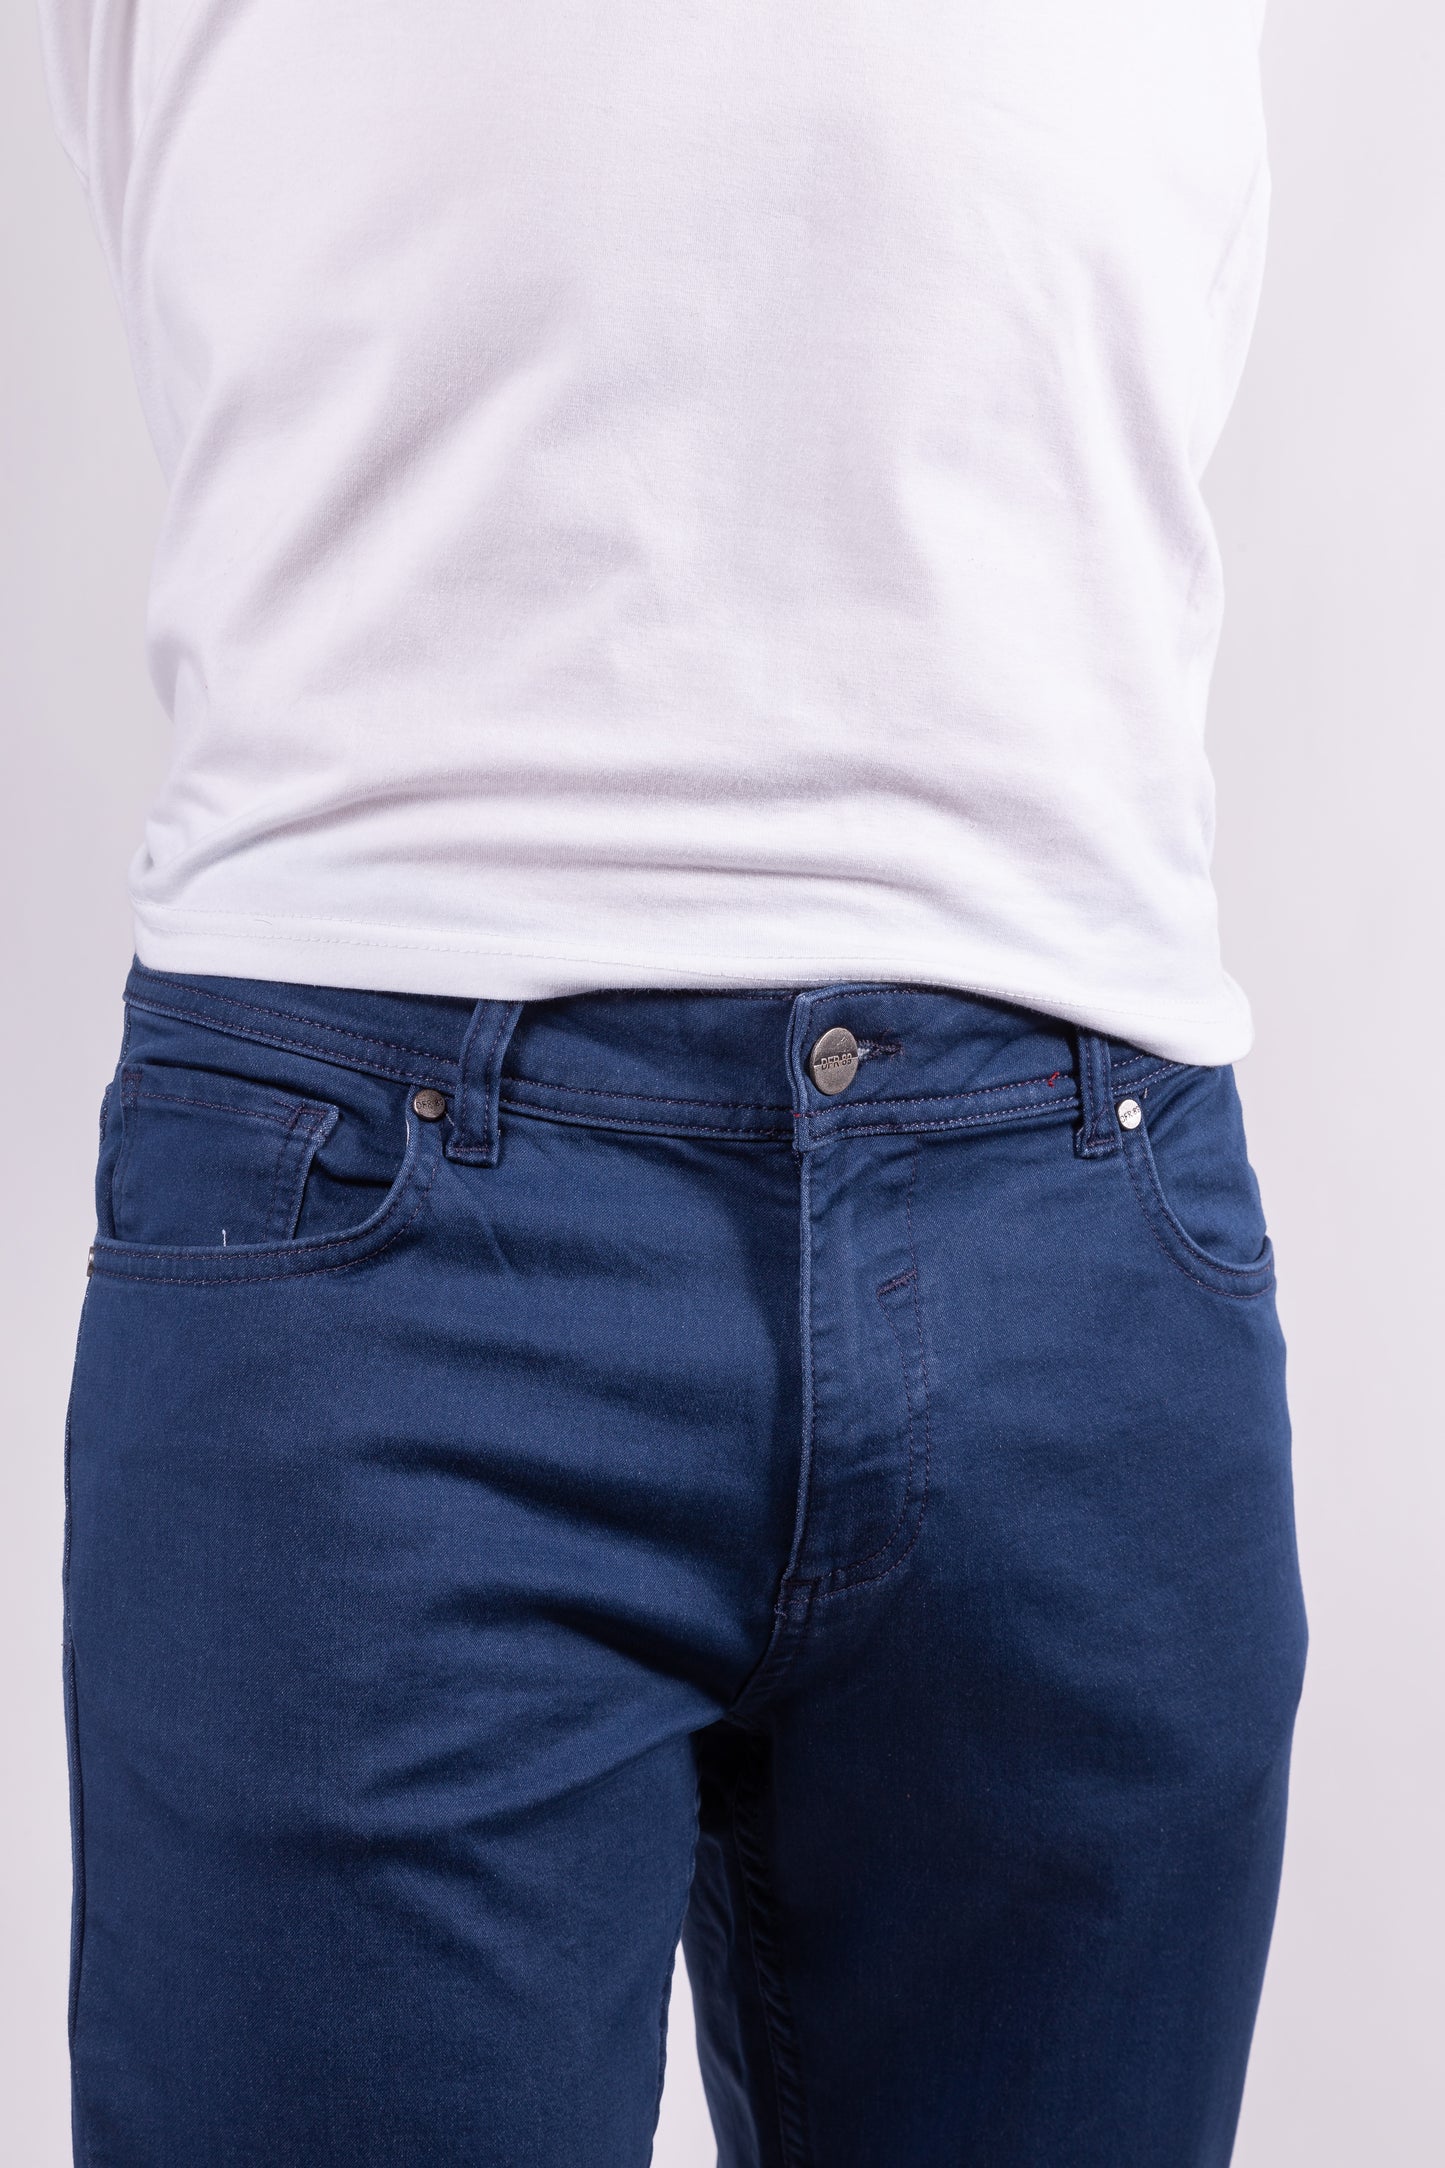 With a comfortable, stretchy cotton like no other, the Forester model from DFR89 is a great pair of men's premium light bue denim jeans for any occasion.